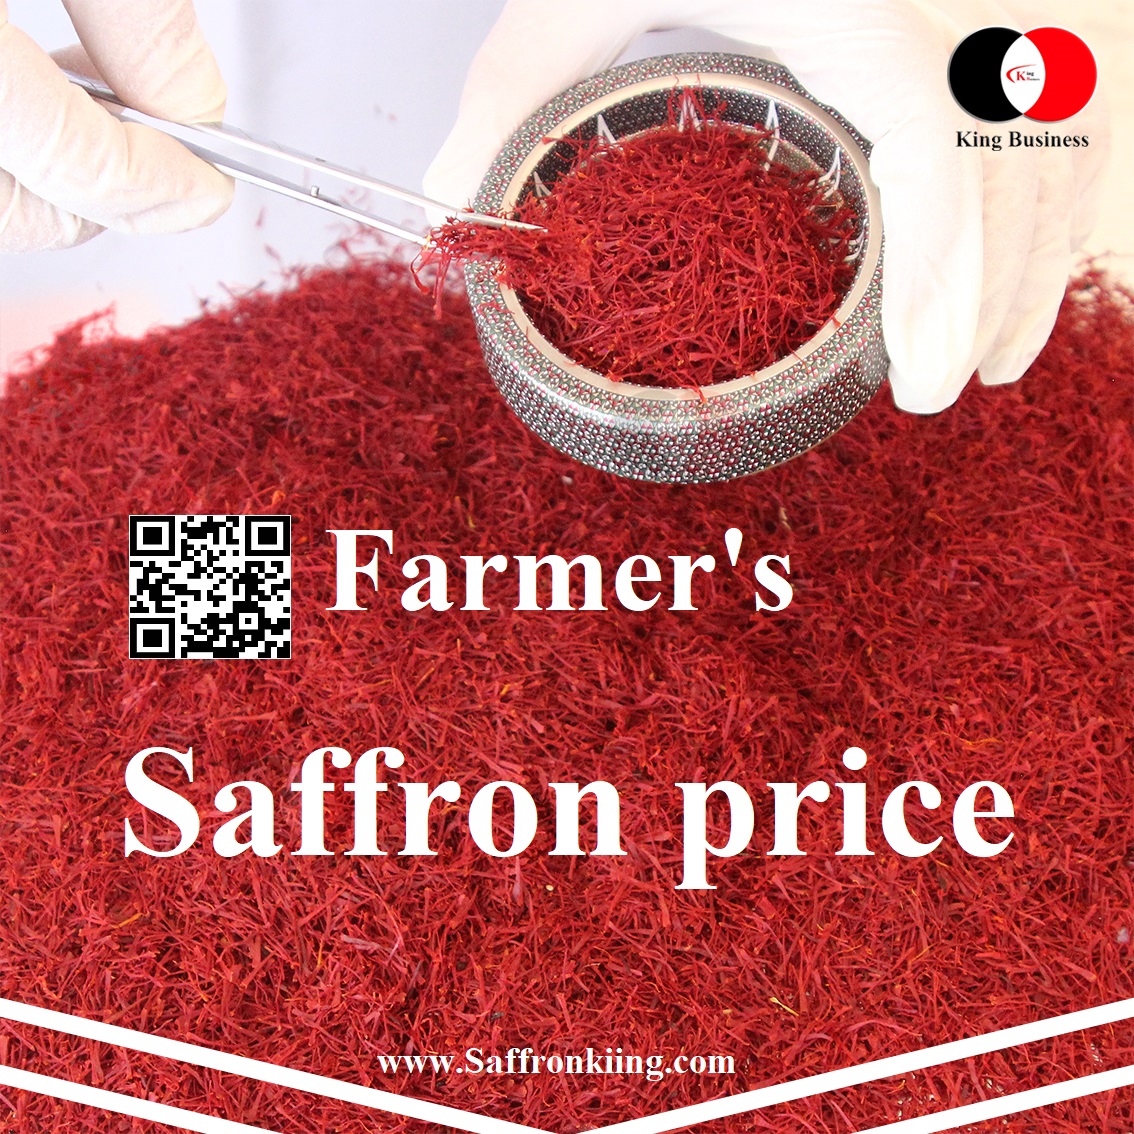 The most popular saffron in Italy | Buying and selling Iranian saffron